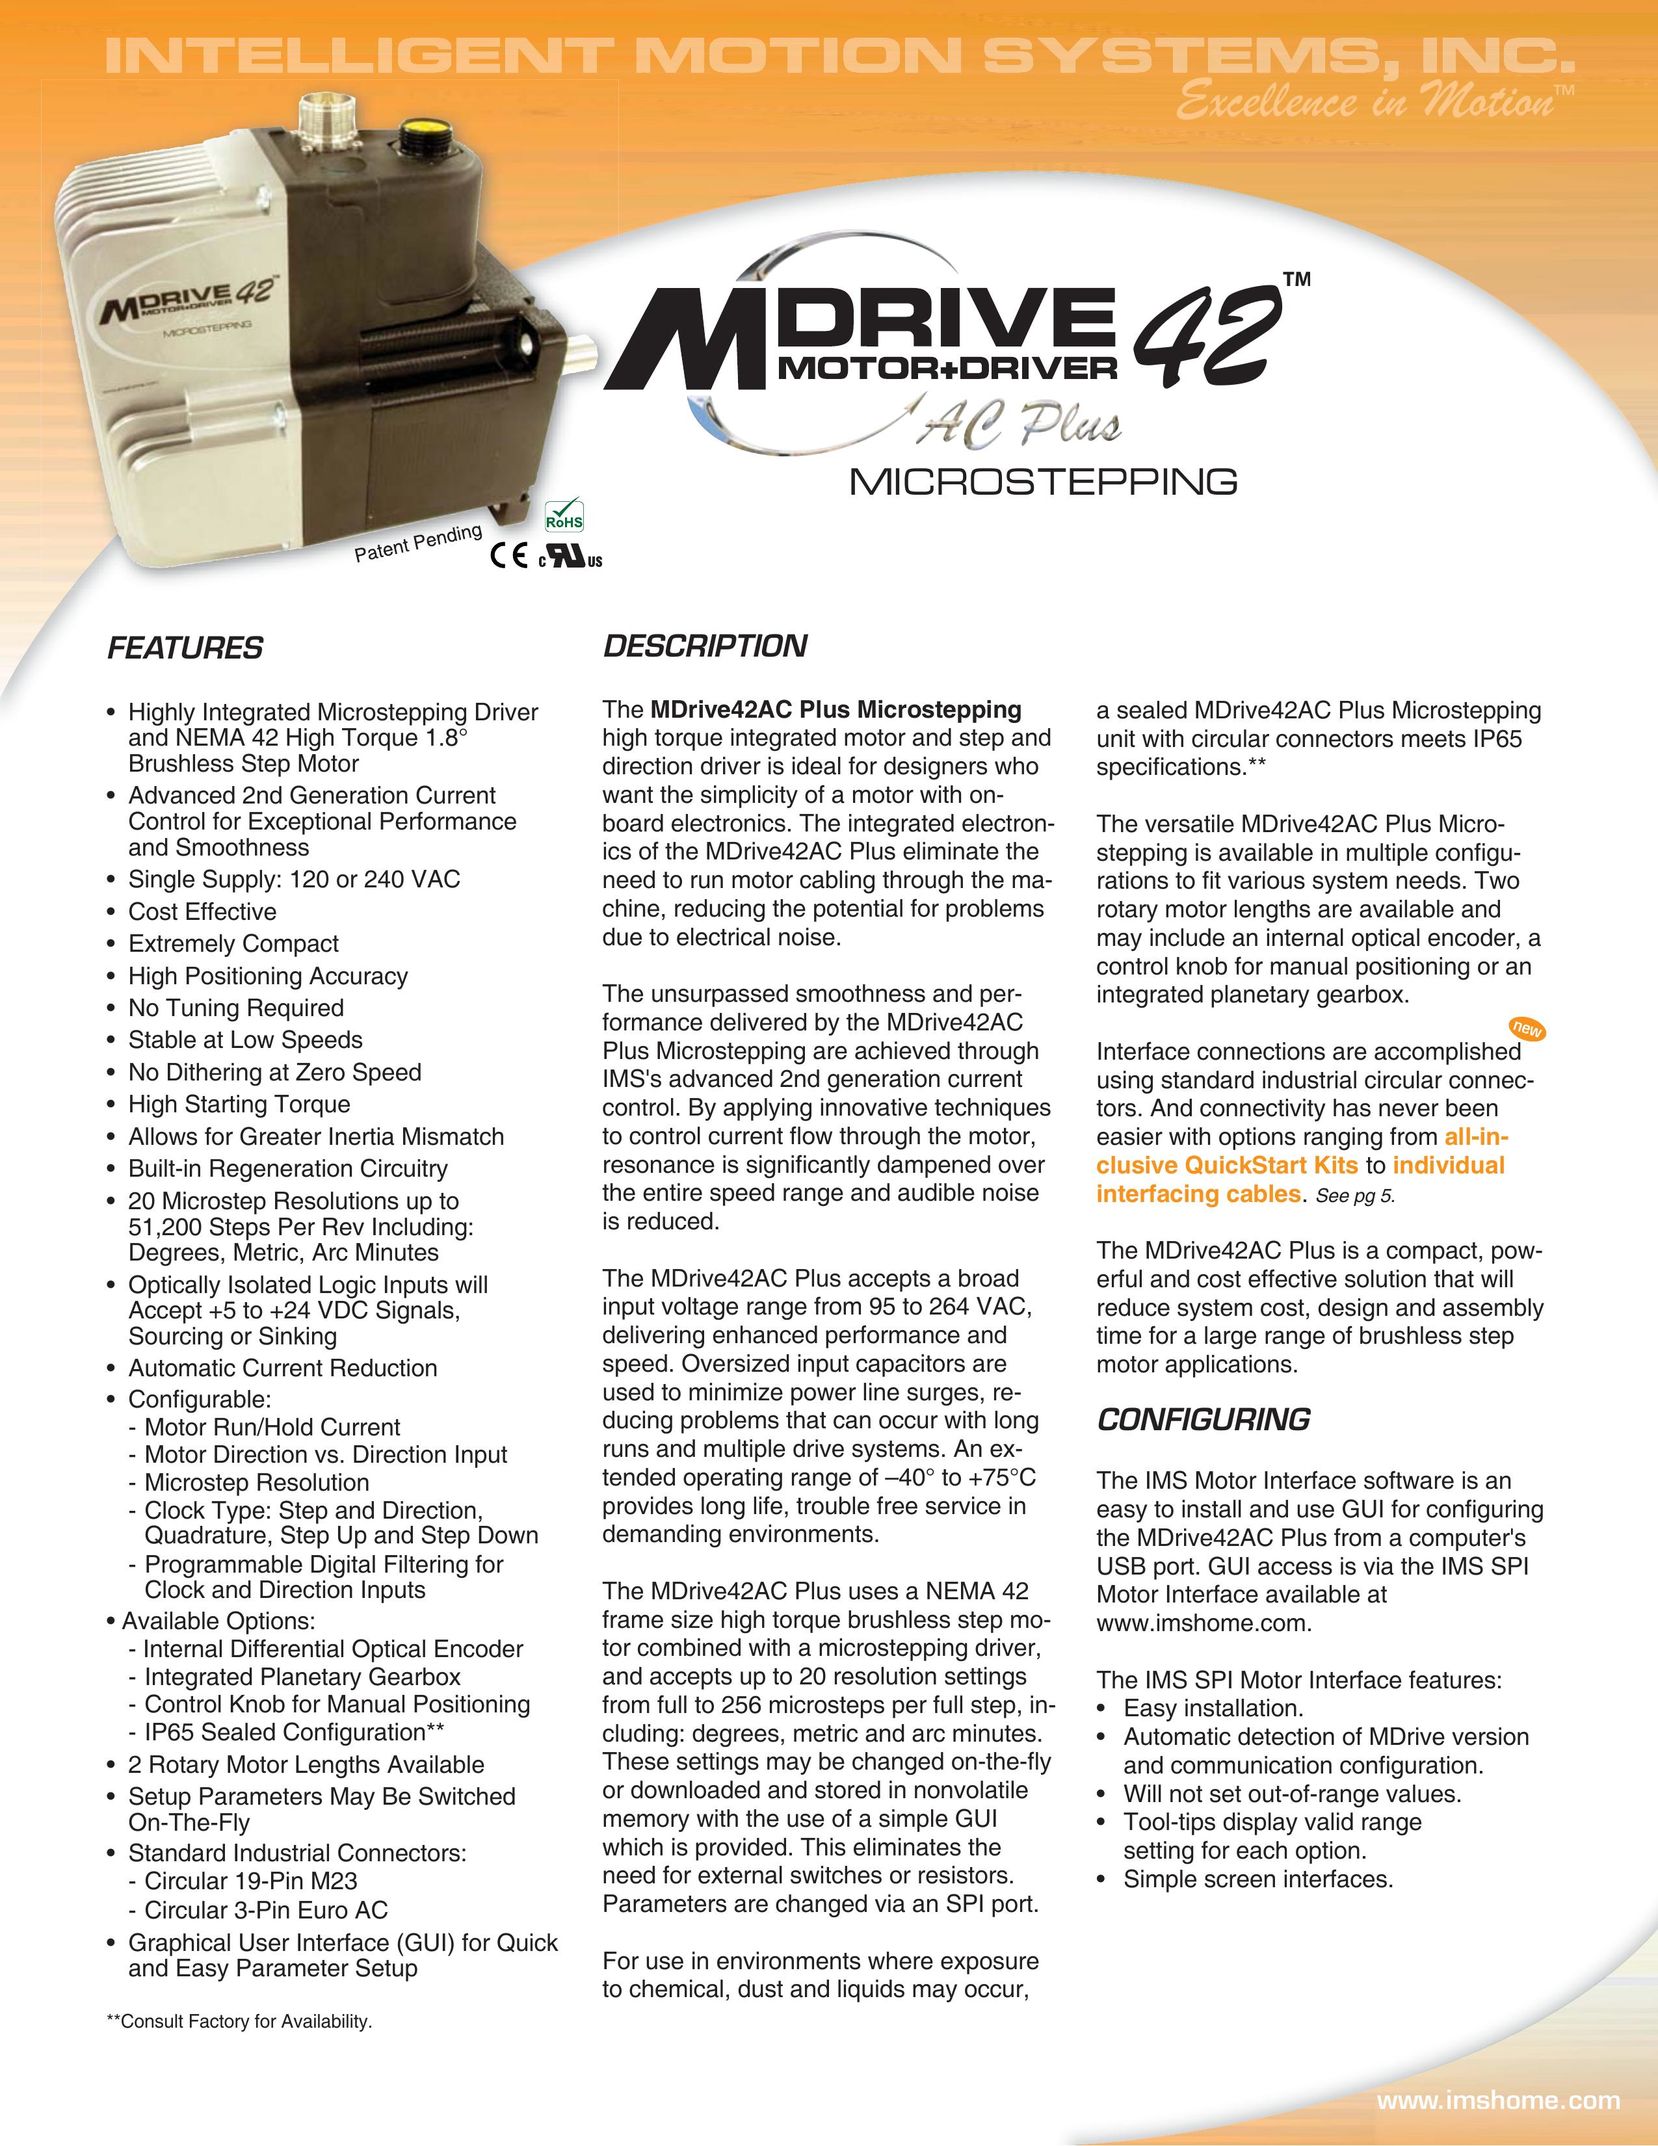 Intelligent Motion Systems MDM42 AC Home Safety Product User Manual